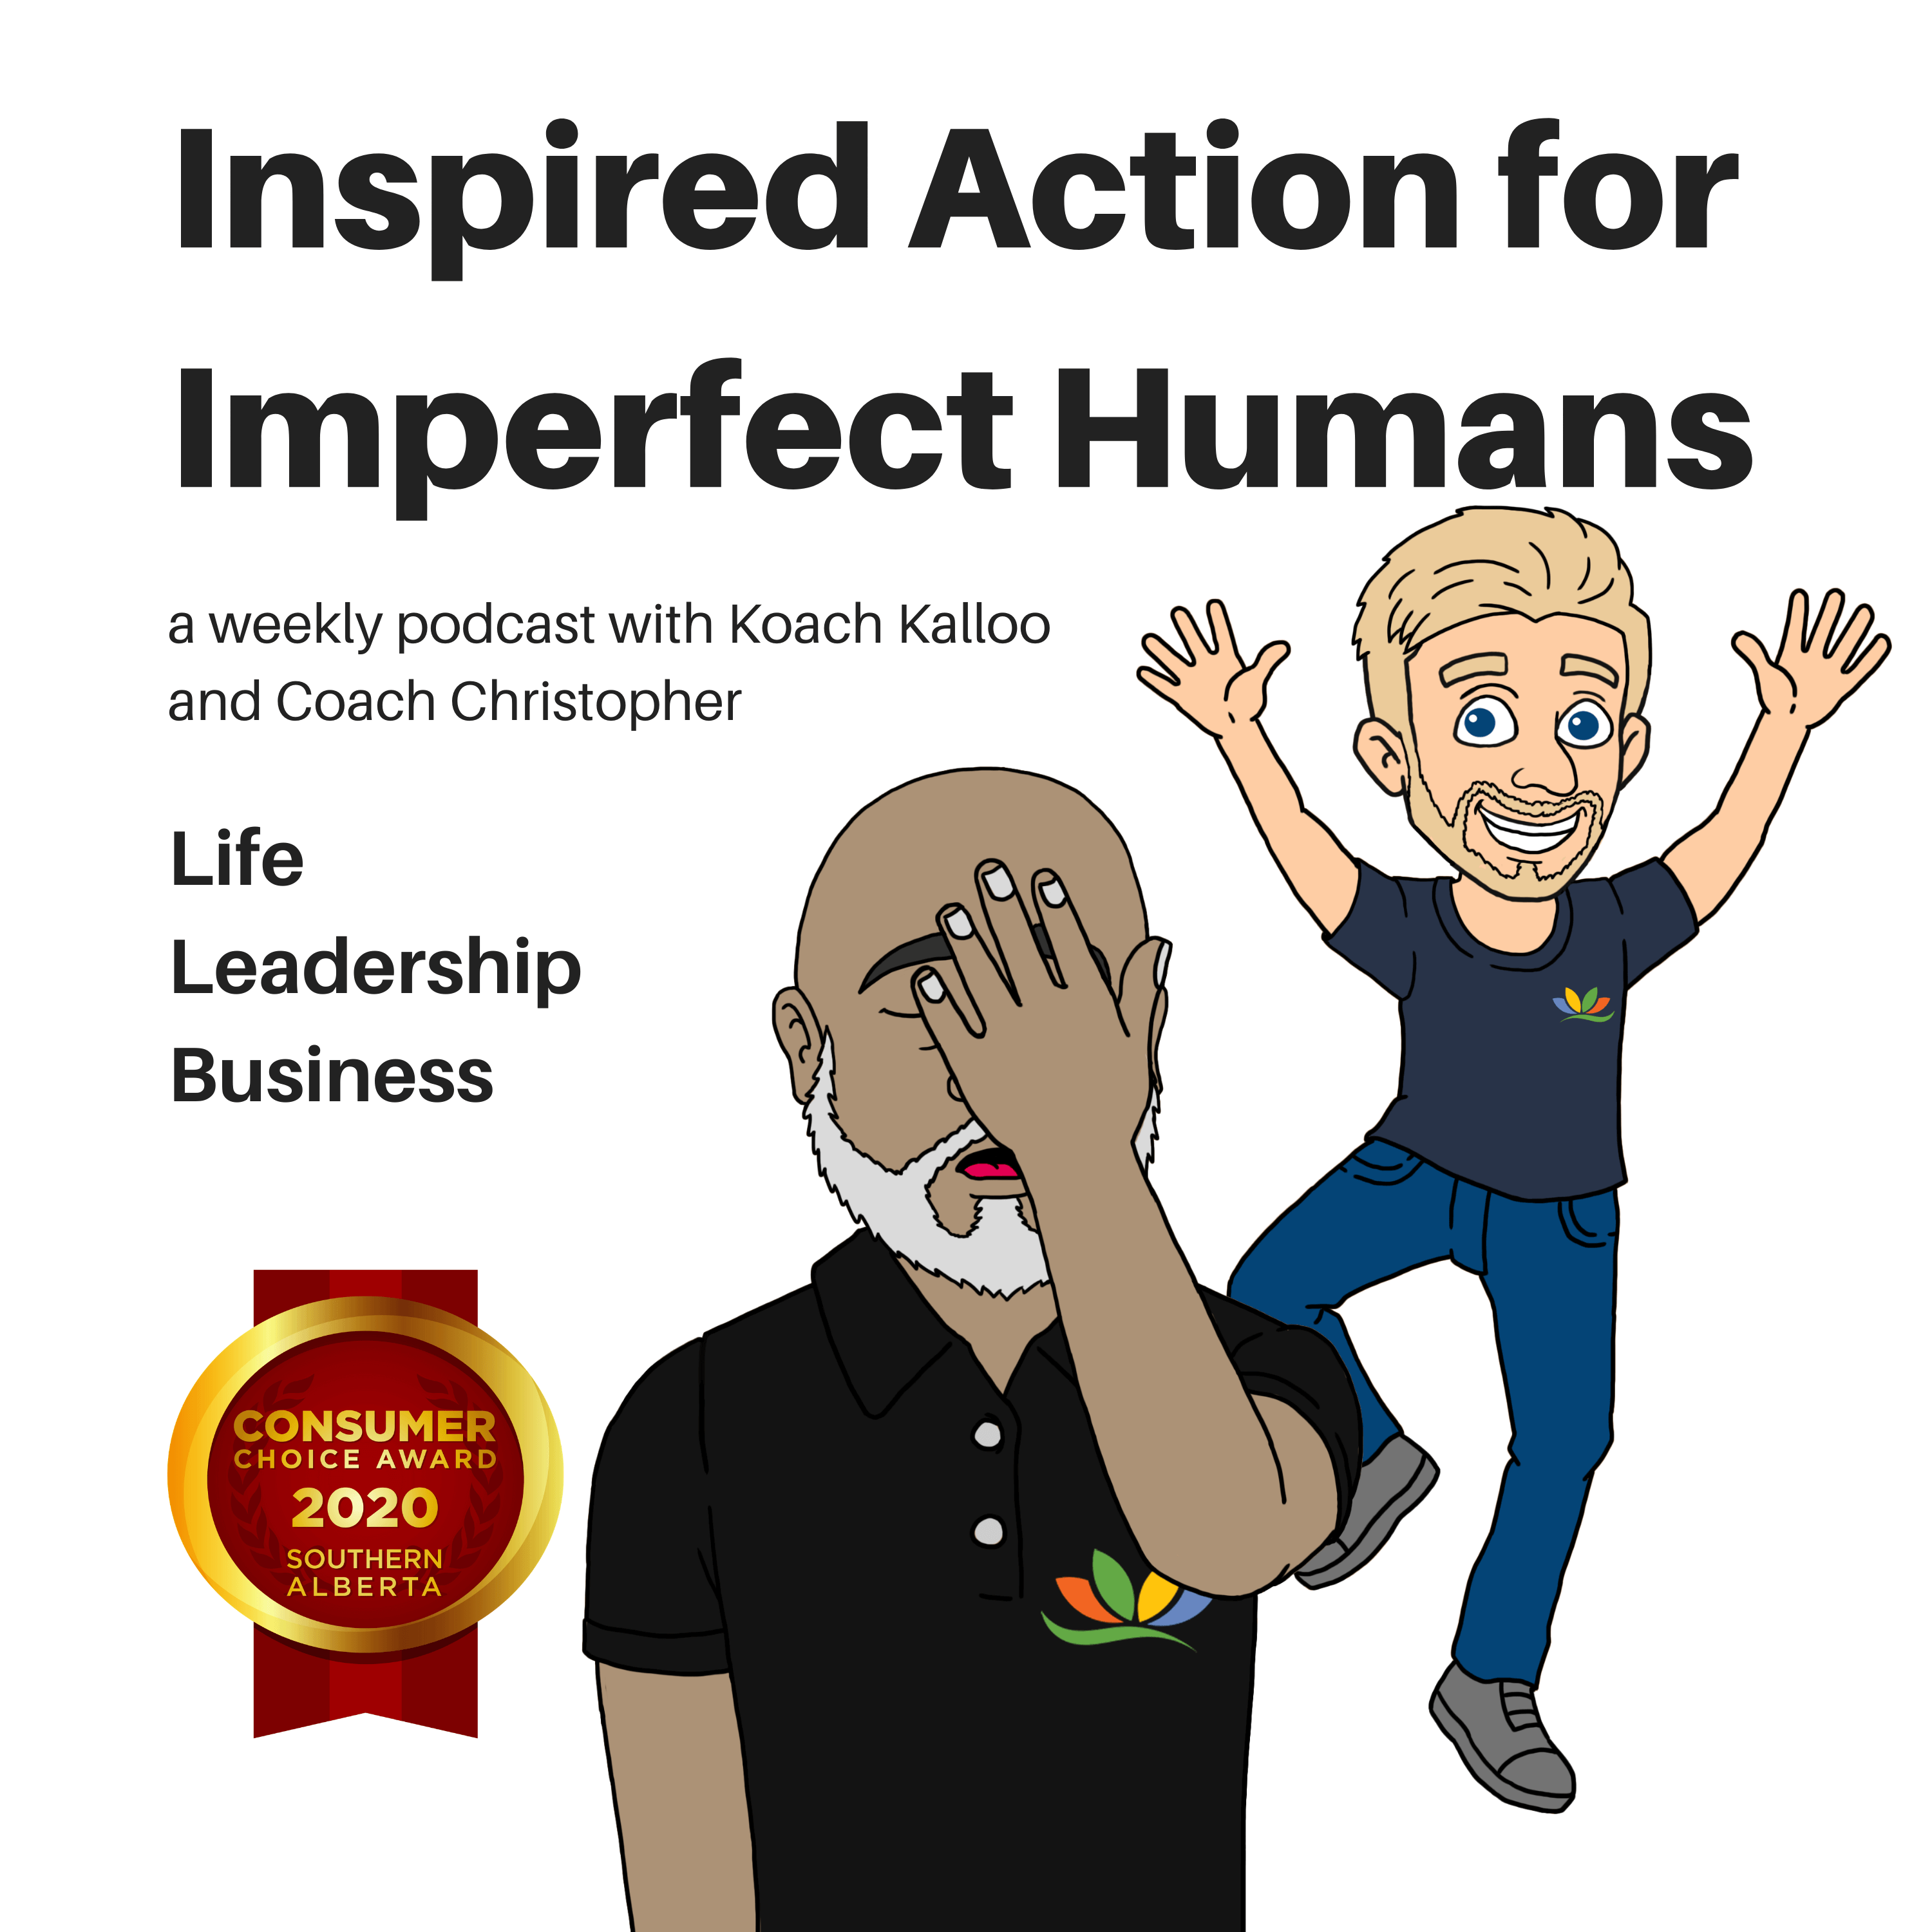 Image for the "Inspired Action for Imperfect Humans" Podcast